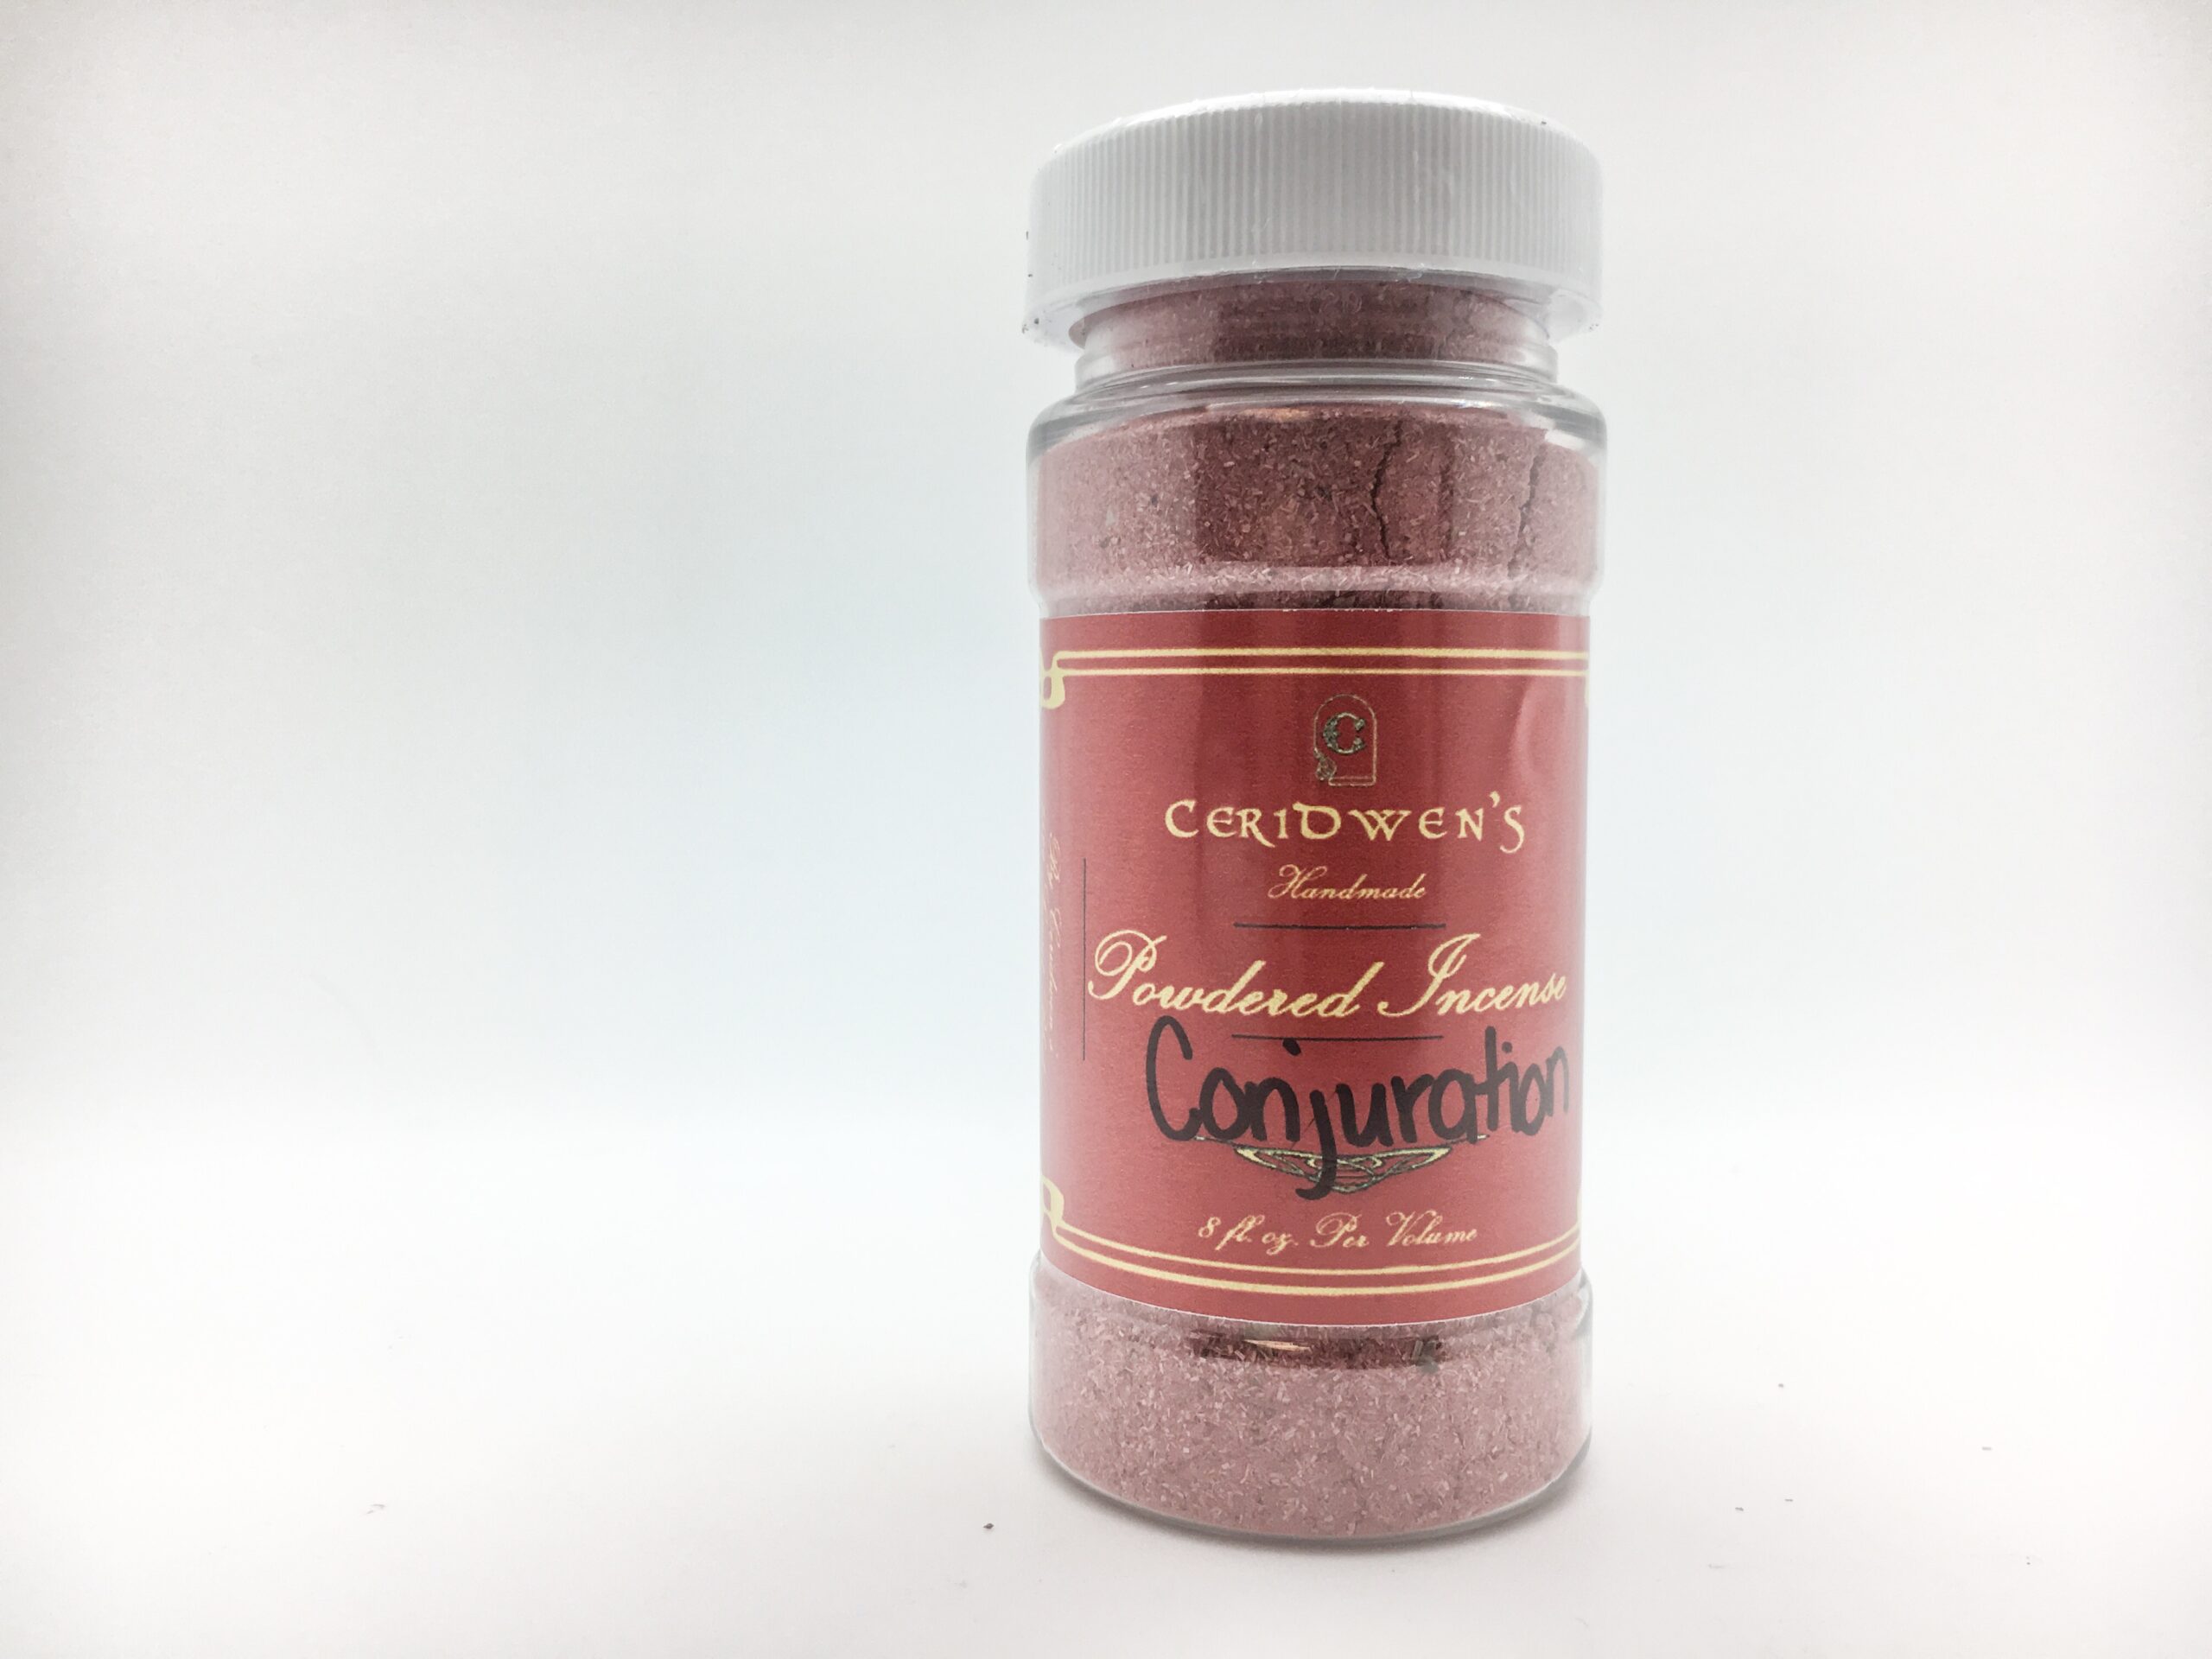 Conjuration Powdered Incense